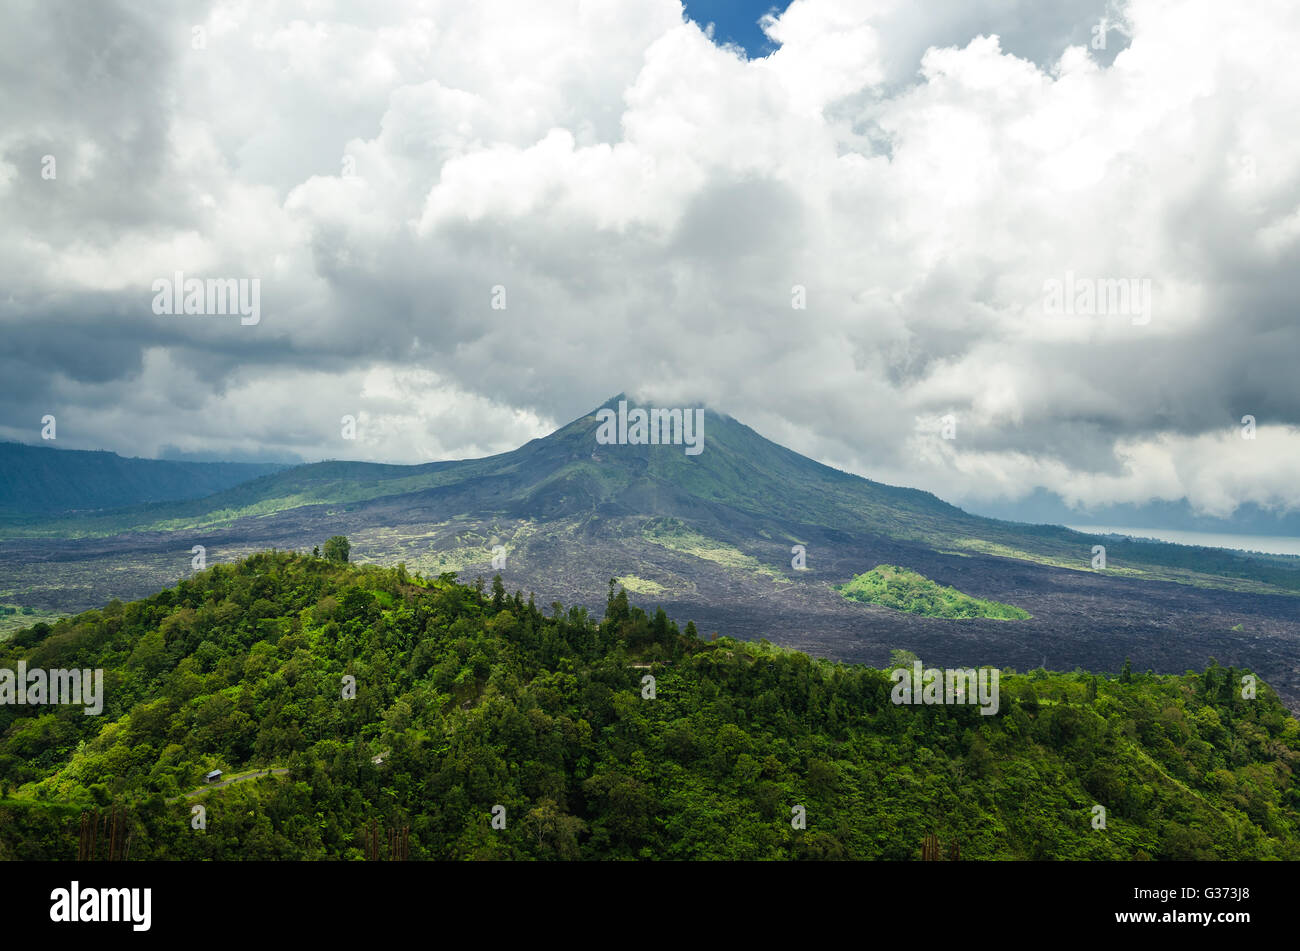 Volcano Mount view from Kintamani, Bali, Indonesia - Volcano landscape view with forest in Bali. Stock Photo